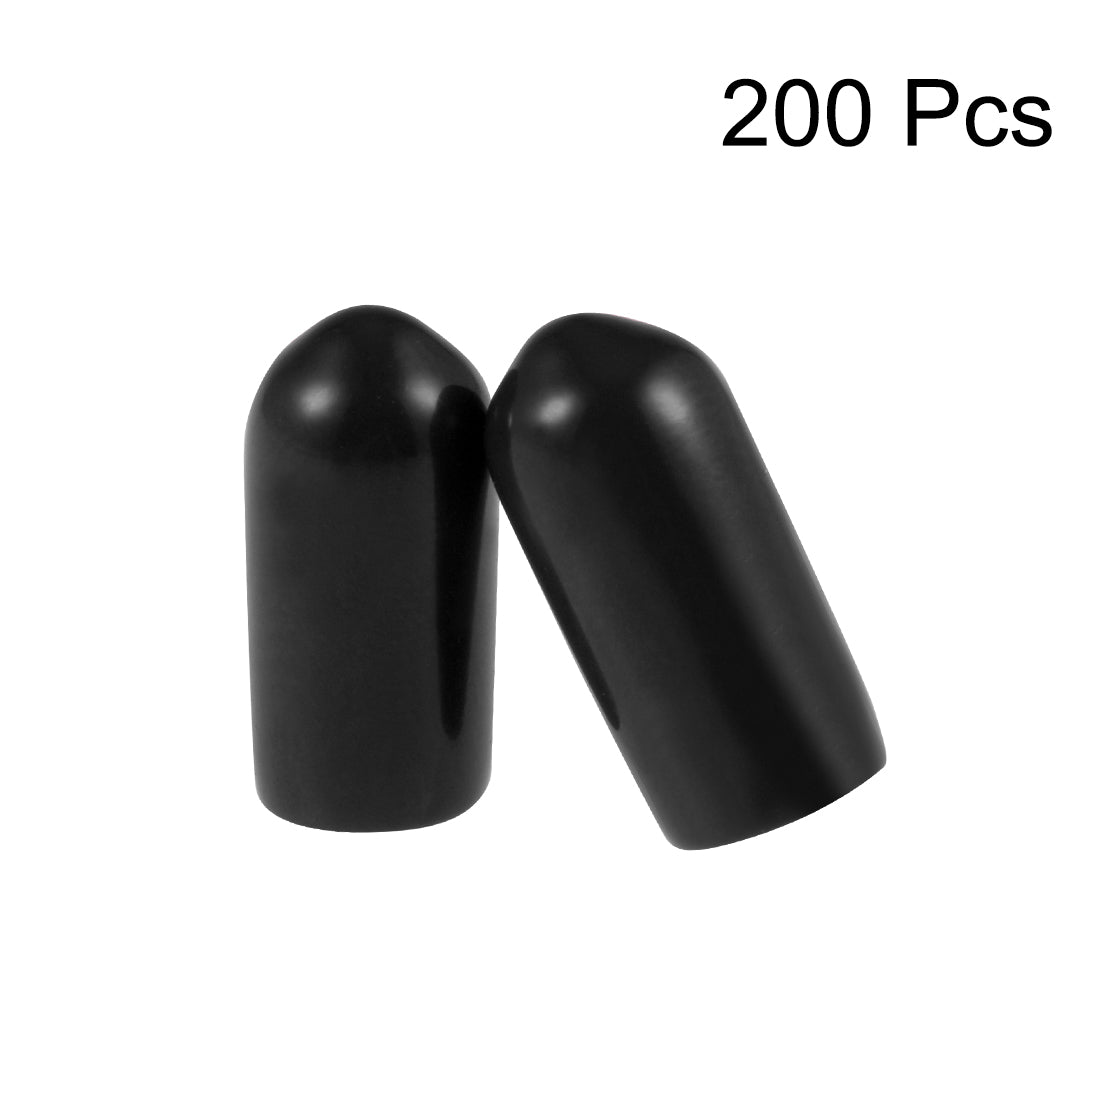 uxcell Uxcell 200pcs Rubber End Caps 5.5mm ID 15mm Height Screw Thread Protectors Black